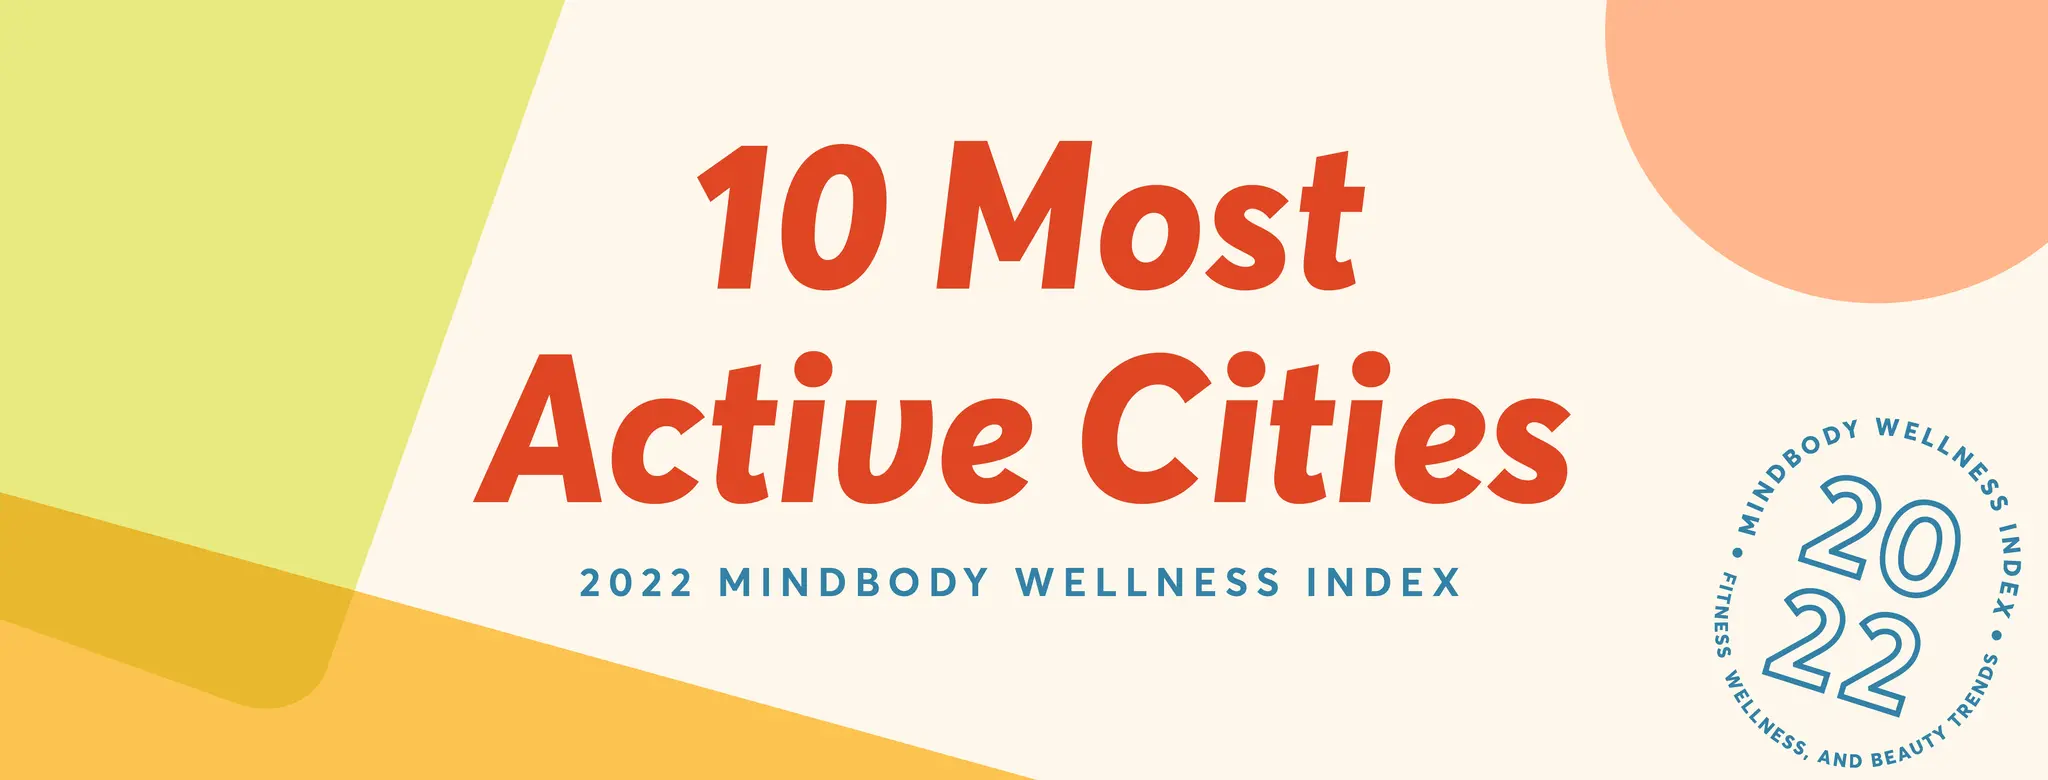 most active cities in america mindbody wellness index